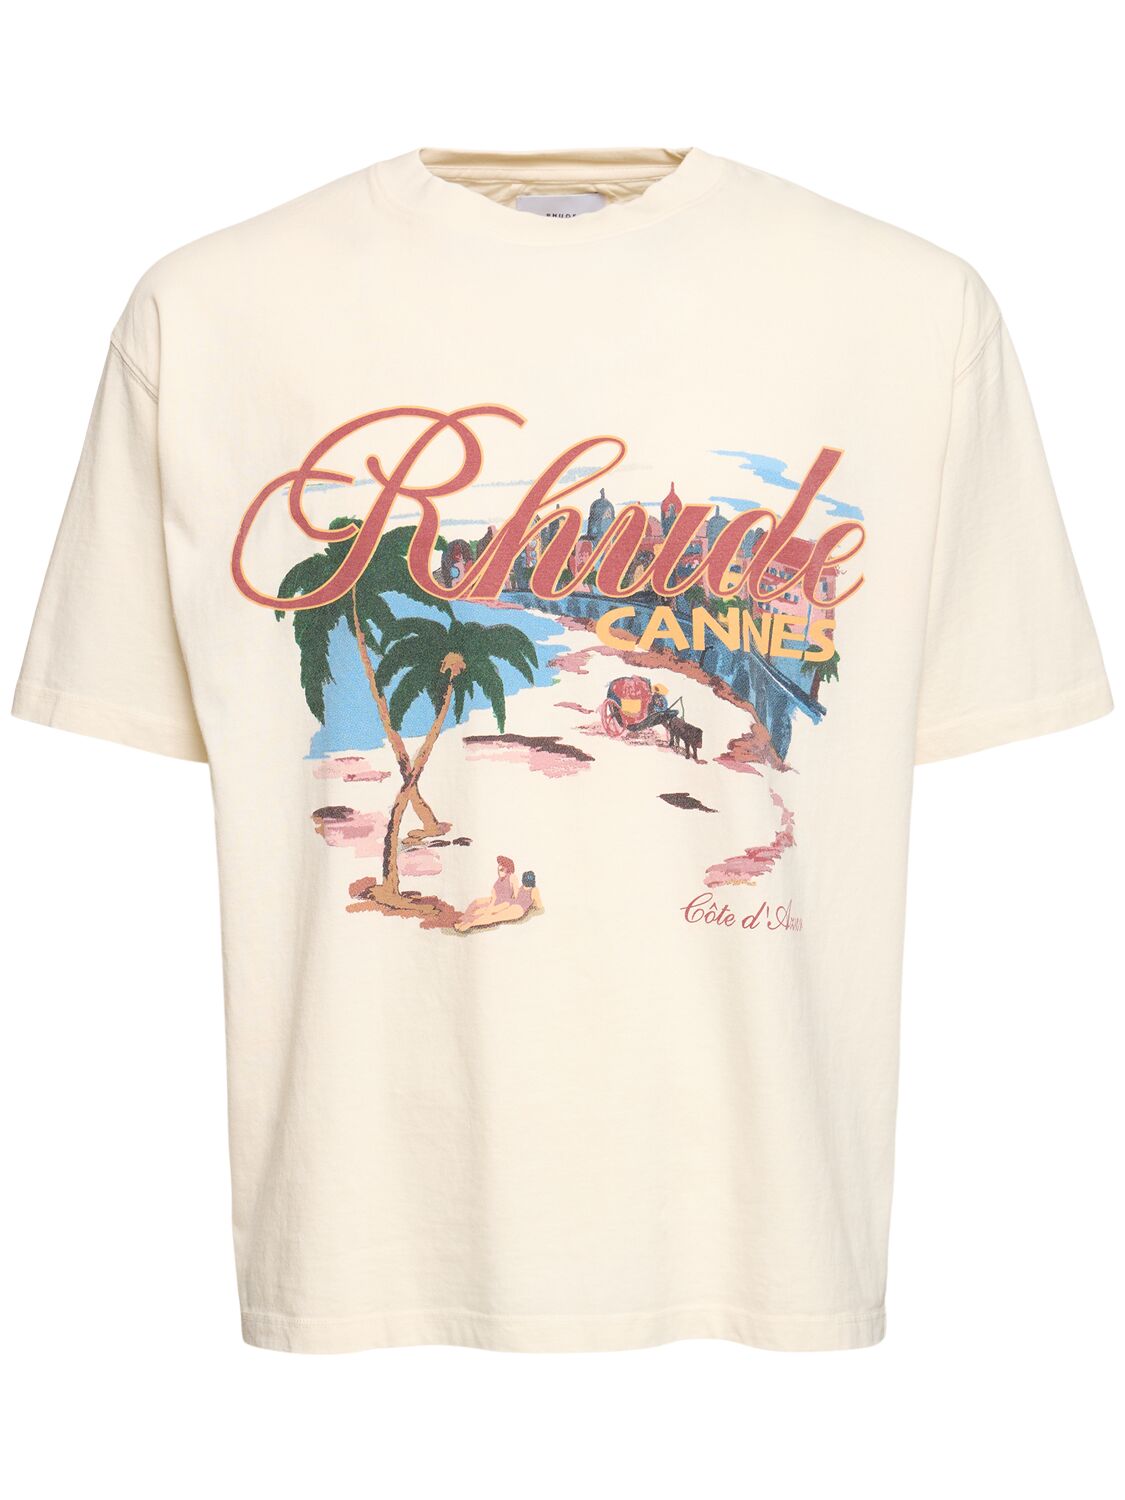 Image of Cannes Beach T-shirt